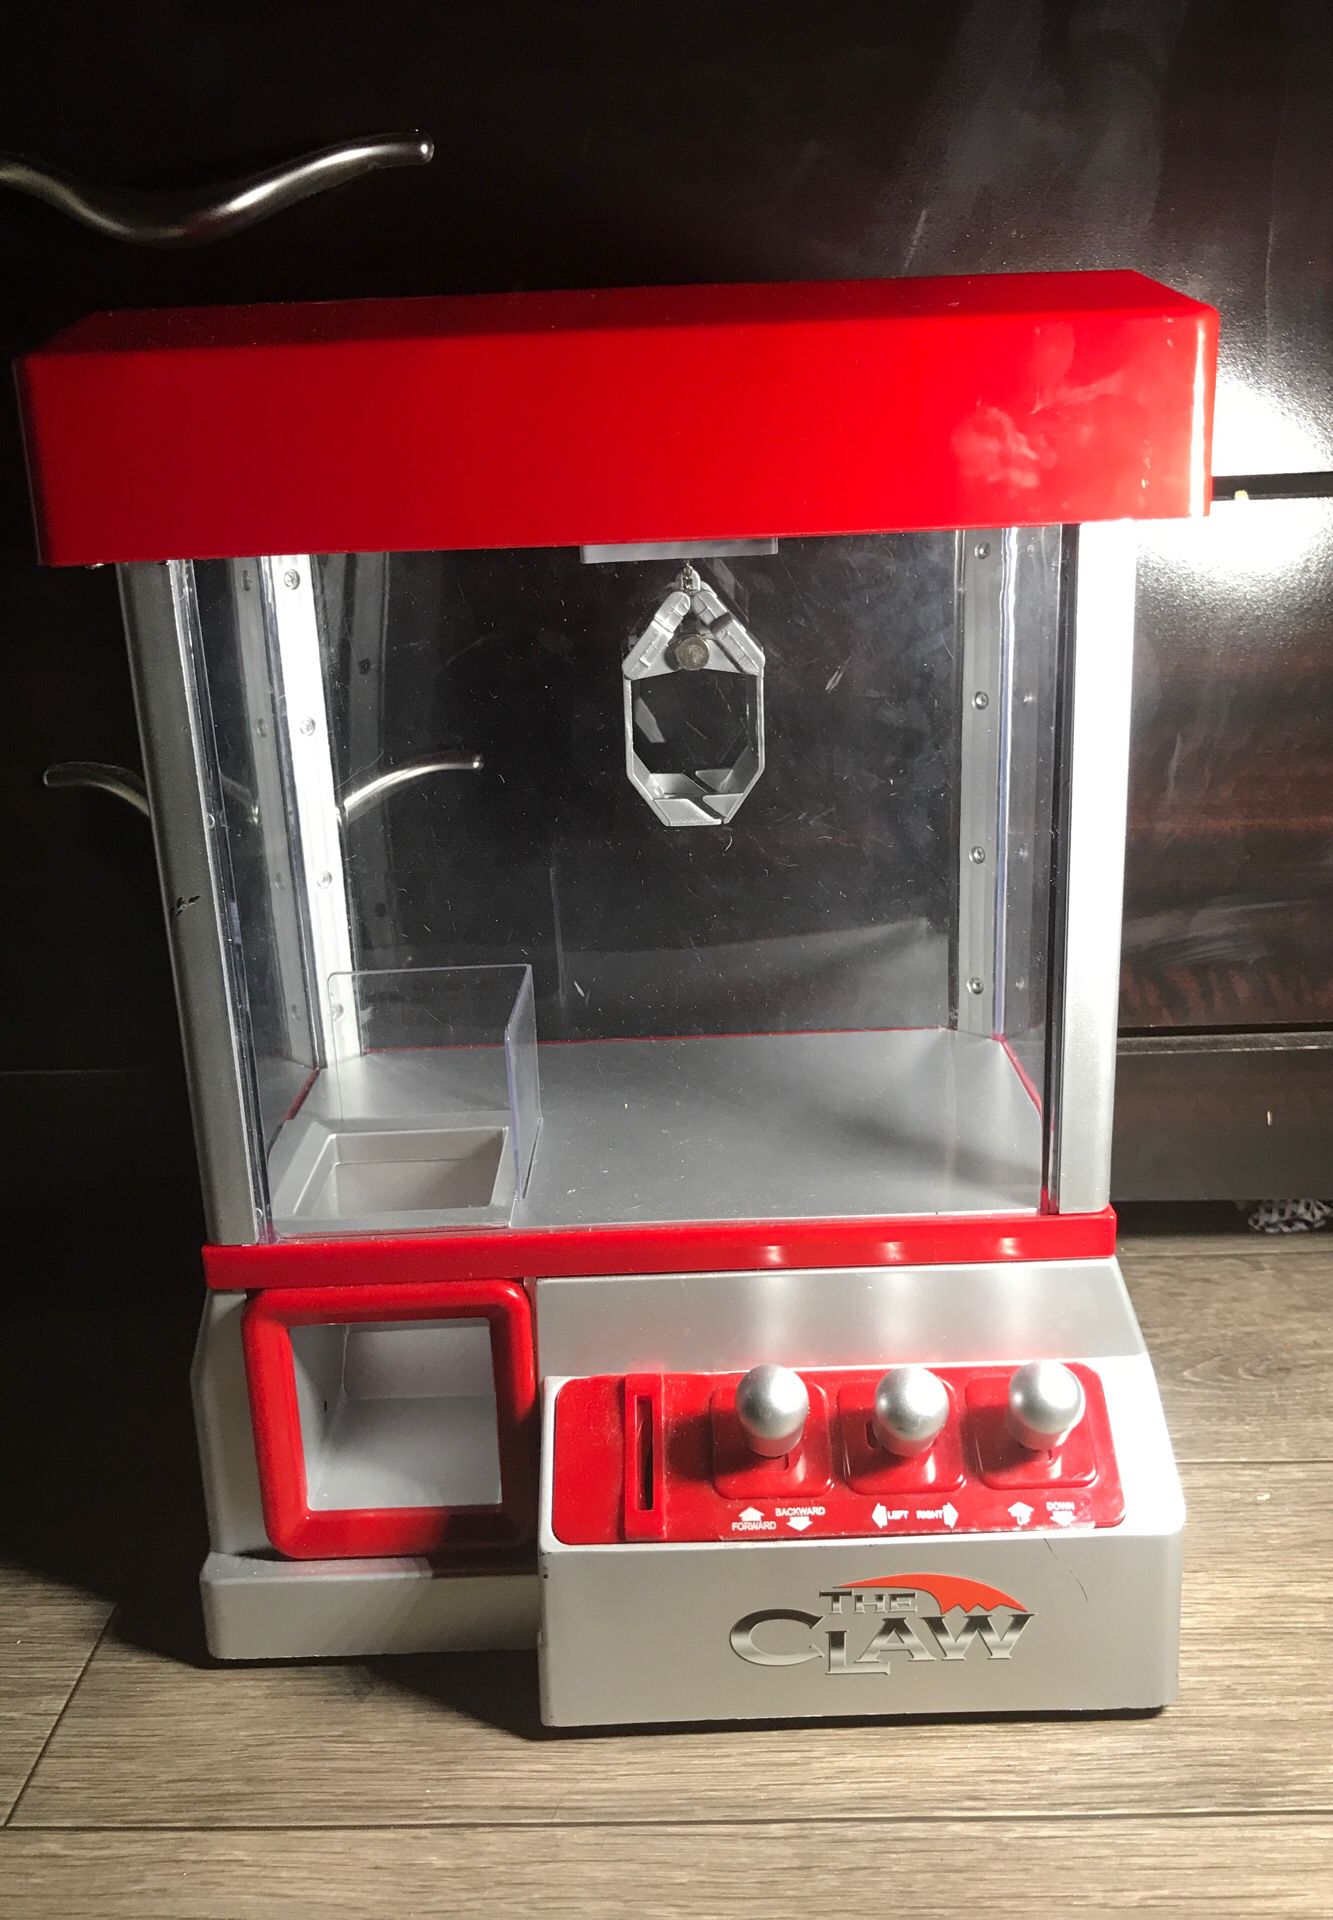 Mini claw machine [ takes real coins ] battery’s included